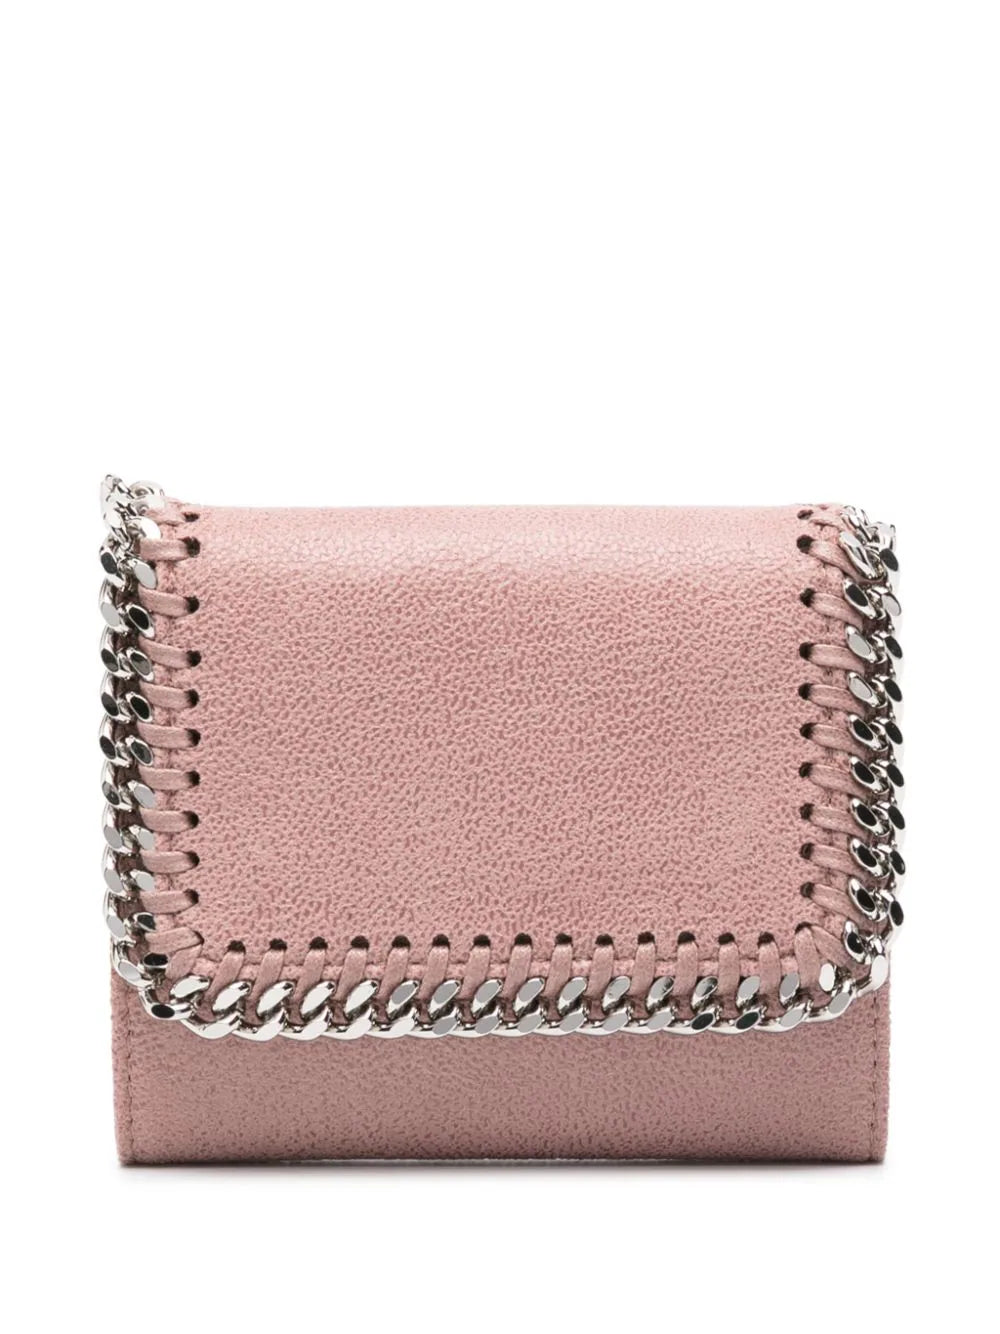 Small Flap Wallet Eco Shaggy Deer W/Palladium Color Chain, pink